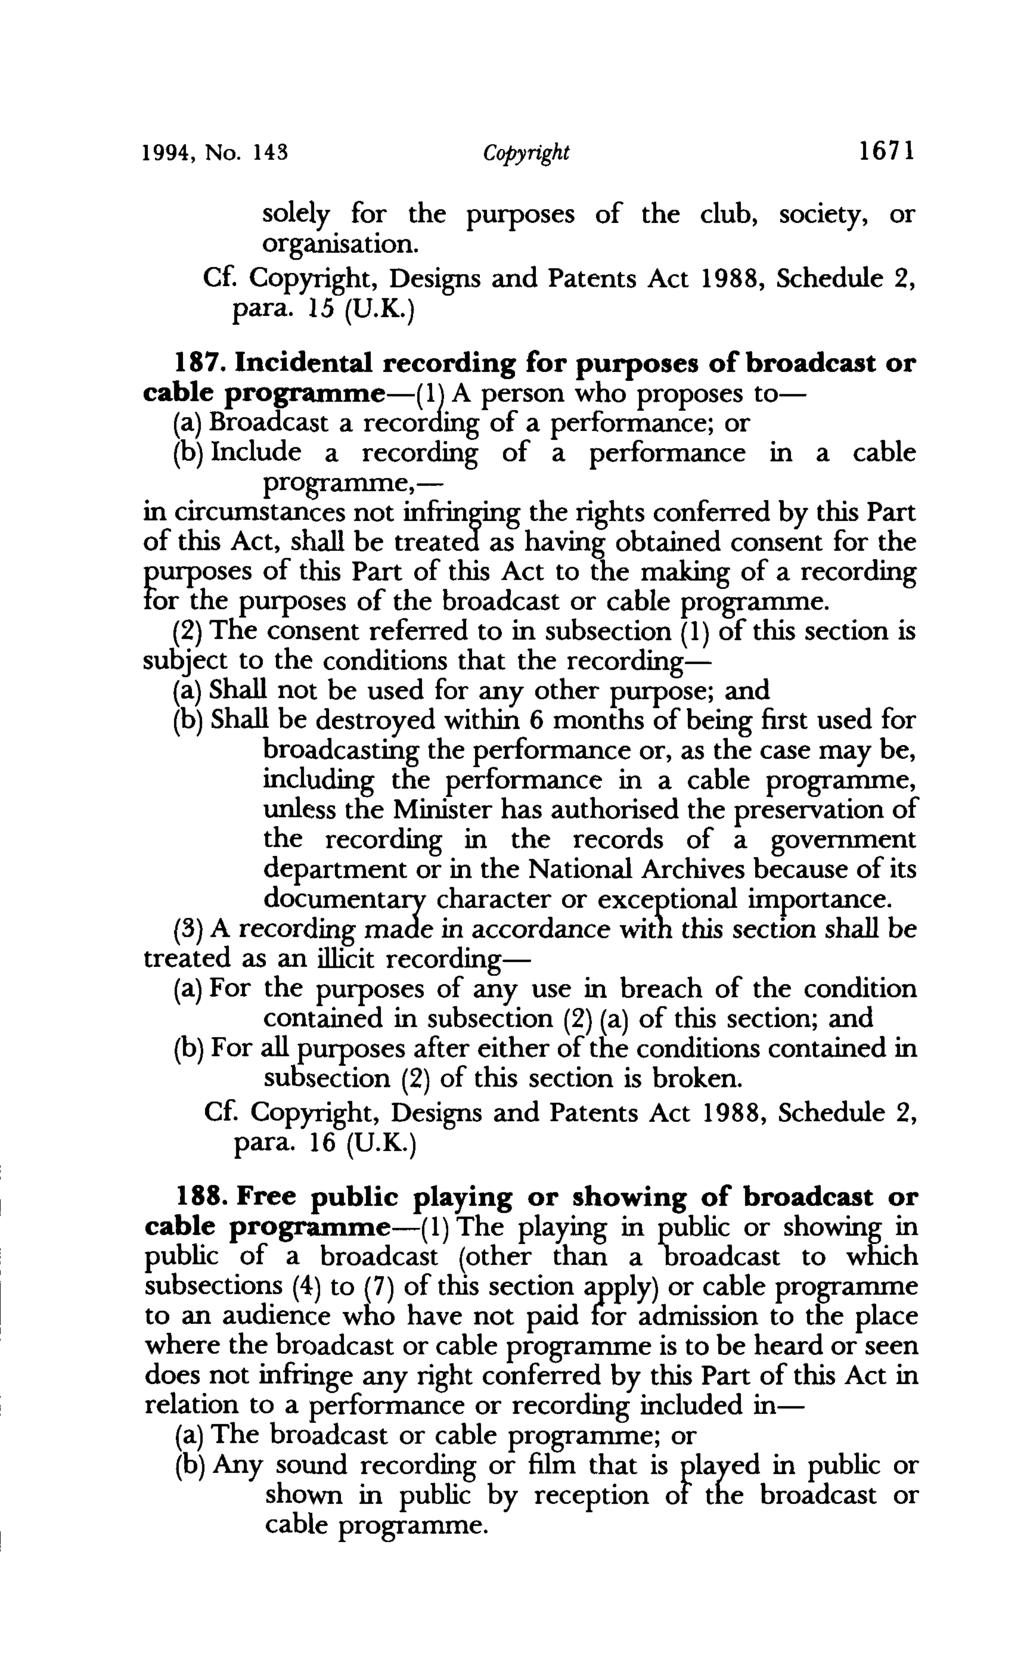 1994, No. 143 Copyright 1671 solely for the purposes of the club, society, or organisation. Cf. Copyright, Designs and Patents Act 1988, Schedule 2, para. 15 (V.K.) 187.